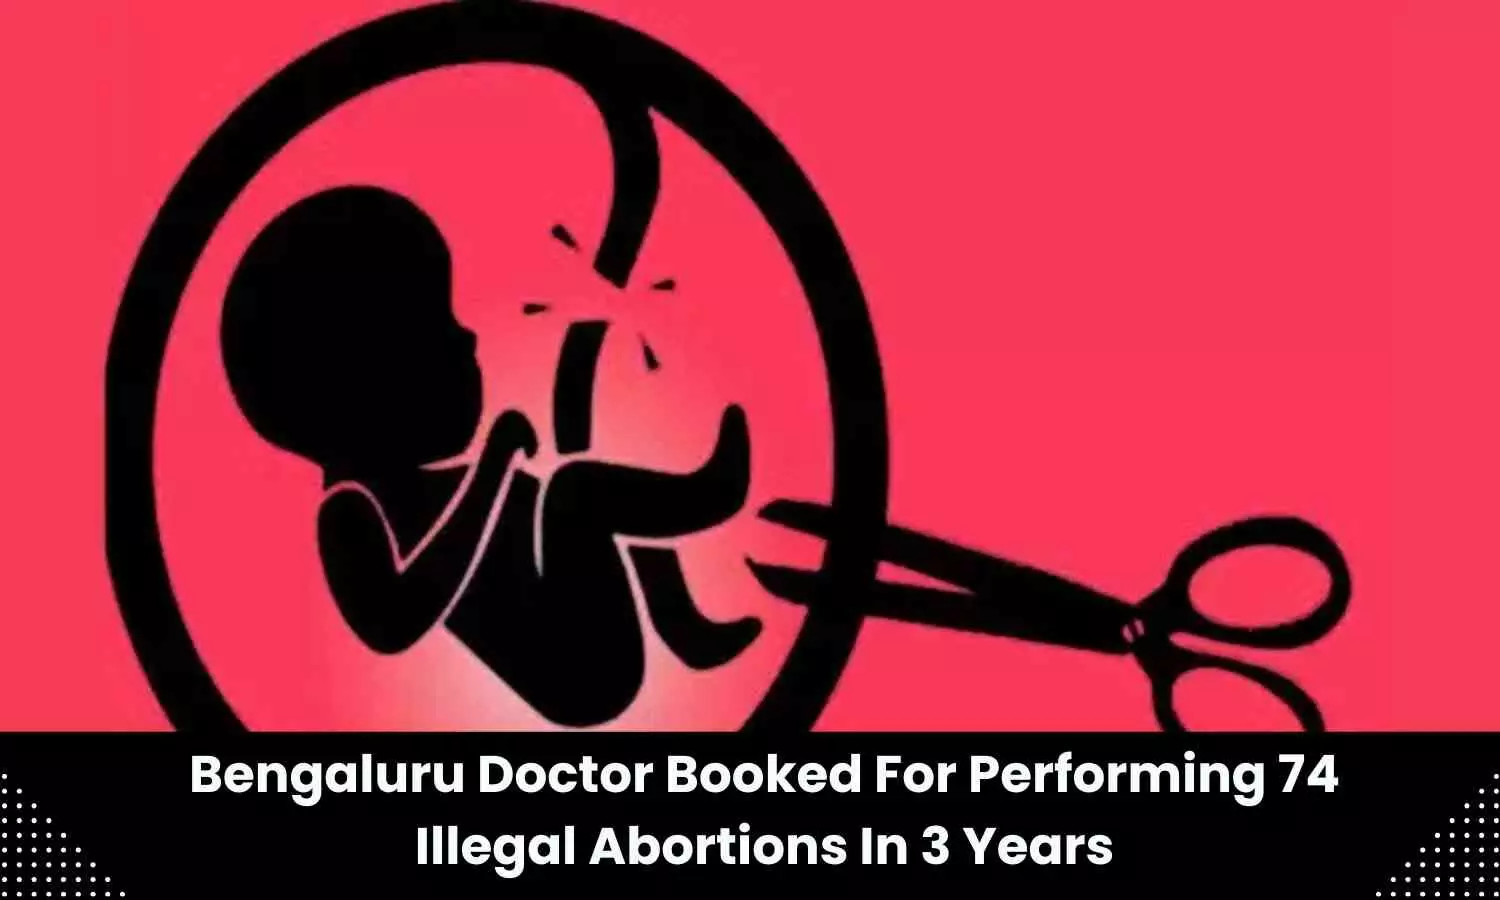 Hospital owner booked for allegedly conducting 74 illegal abortions